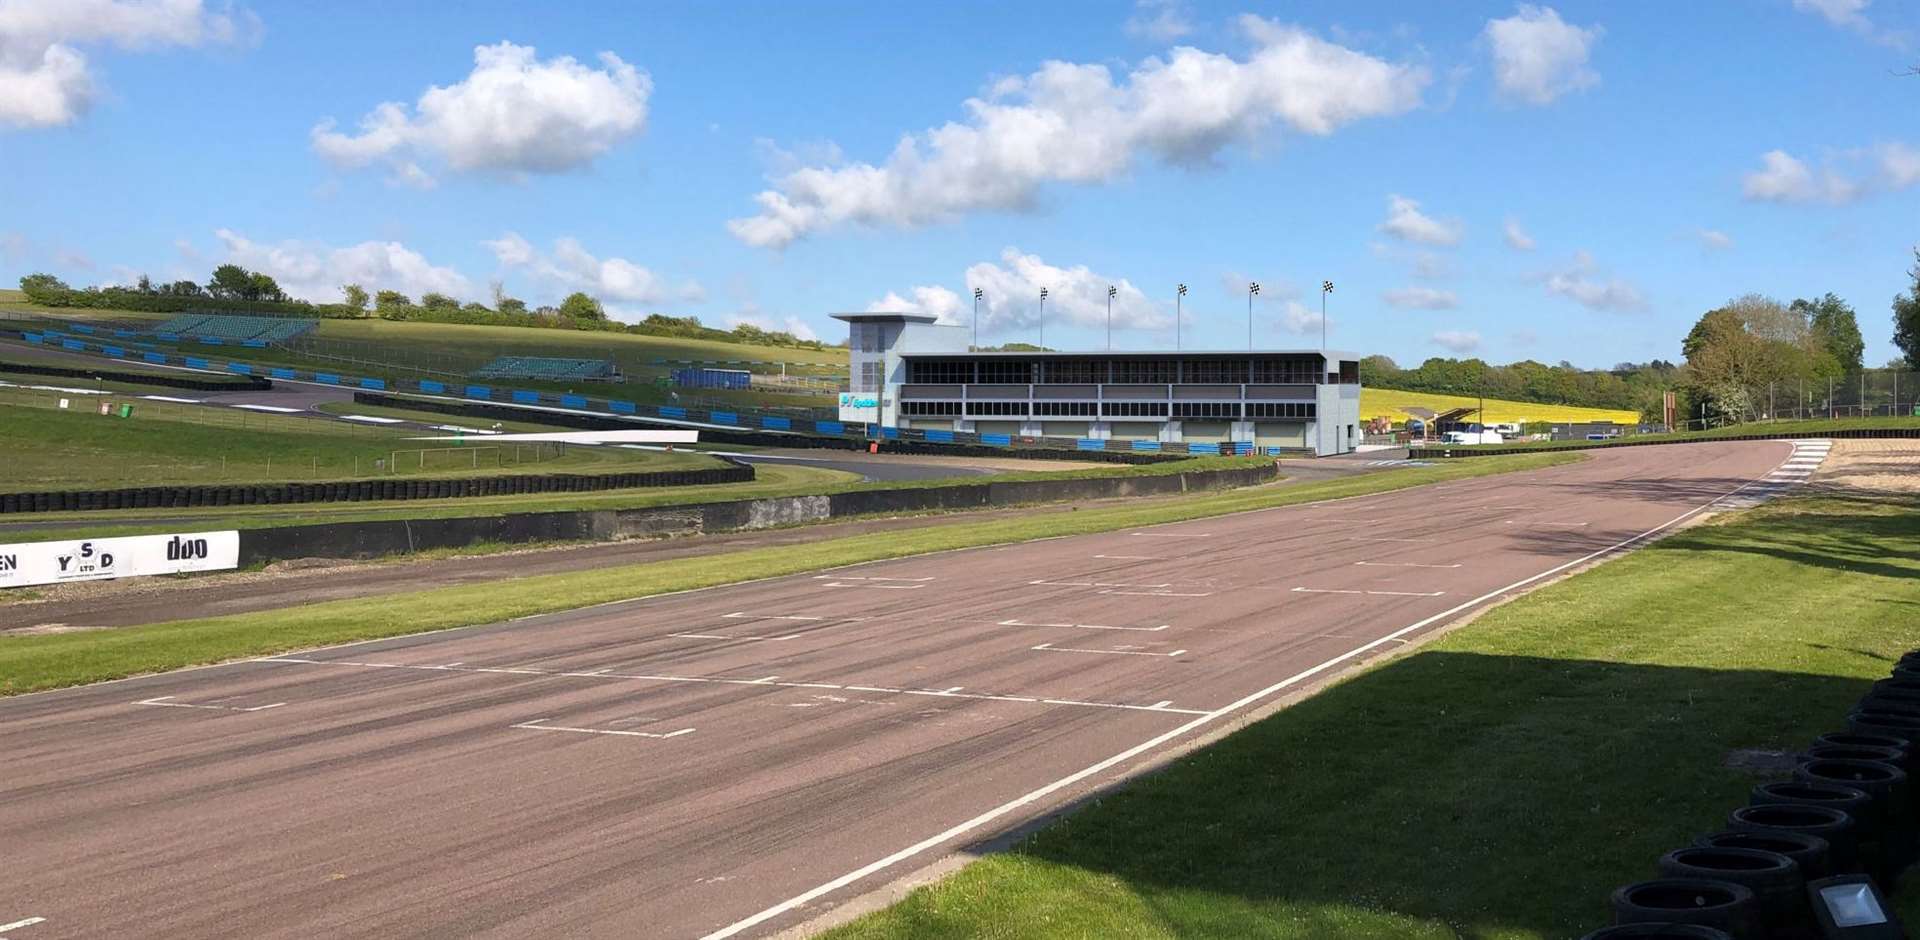 How the new building in the Lydden paddock could look